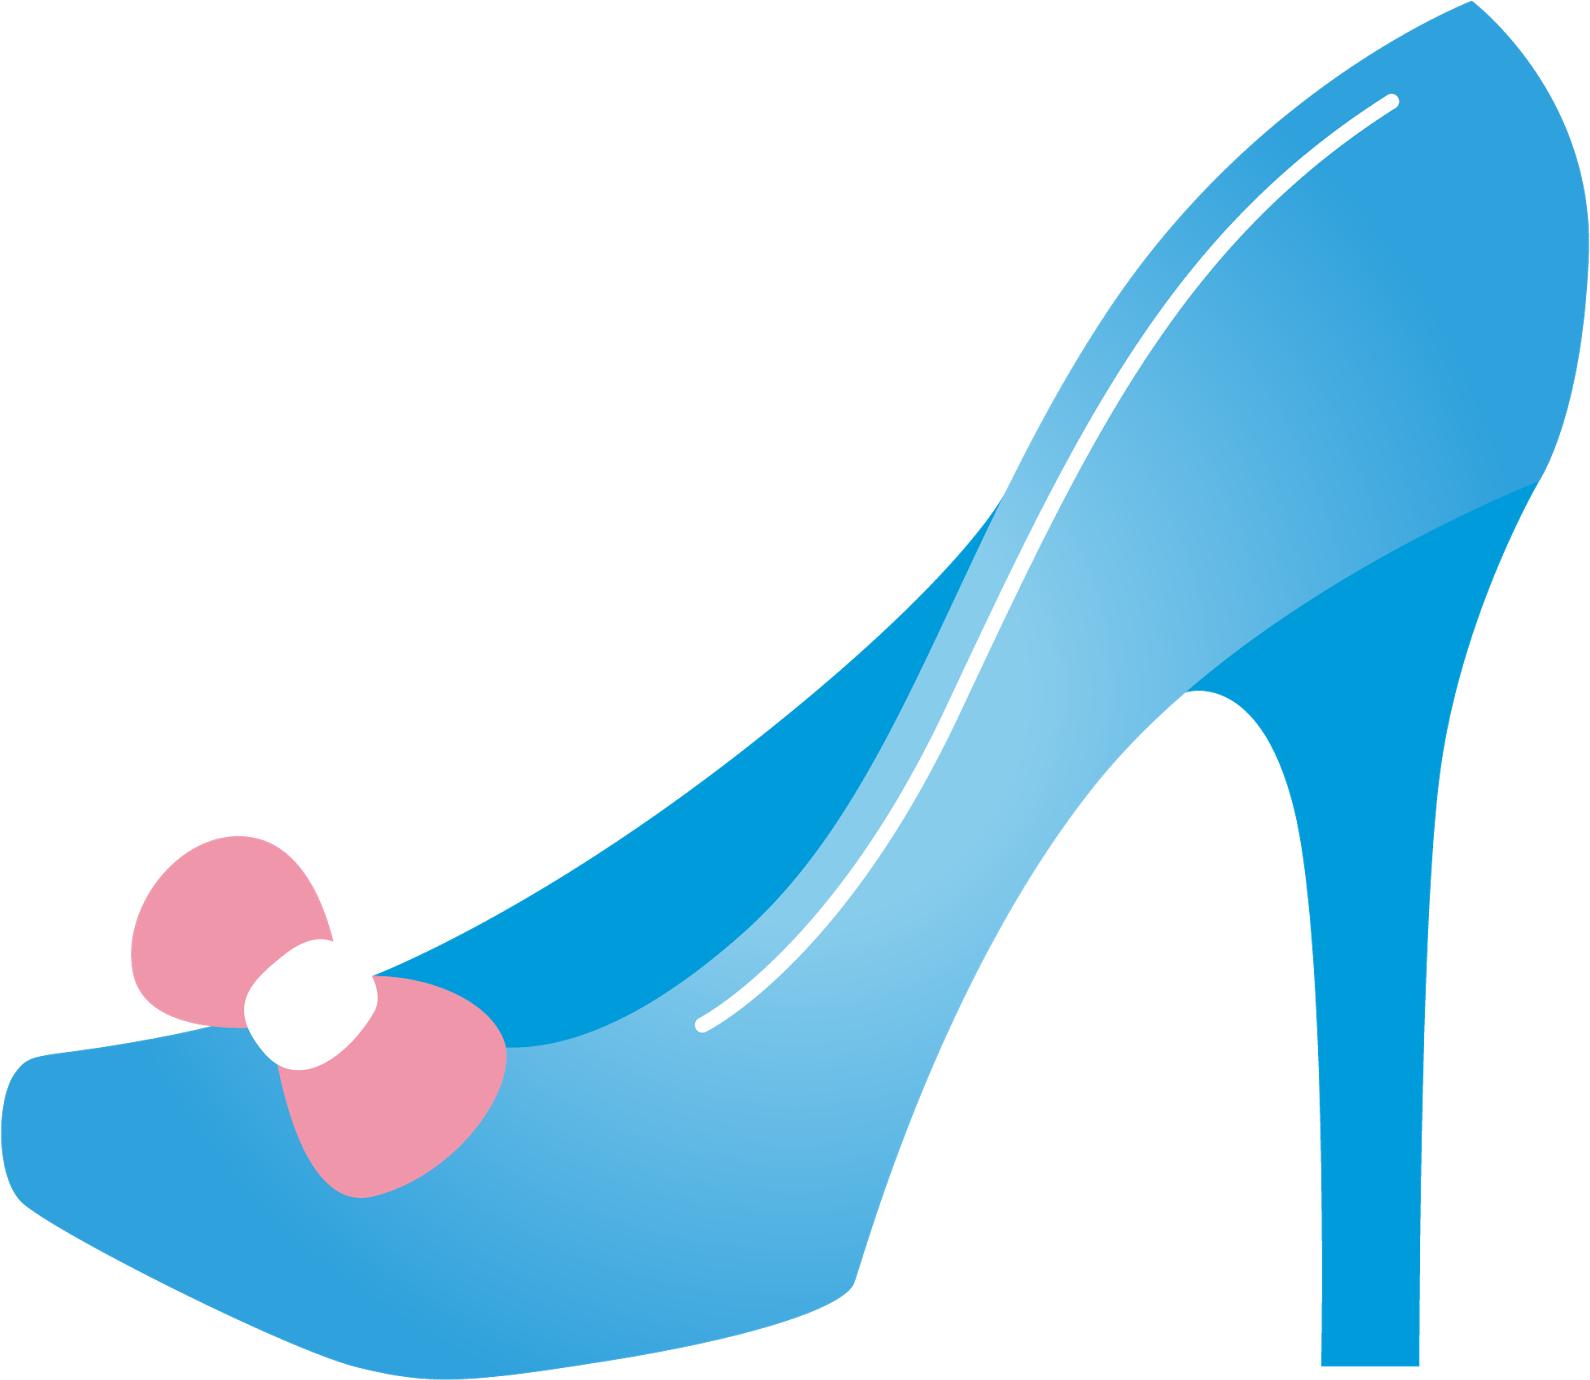 Cinderella Shoes PNG High-Quality Image